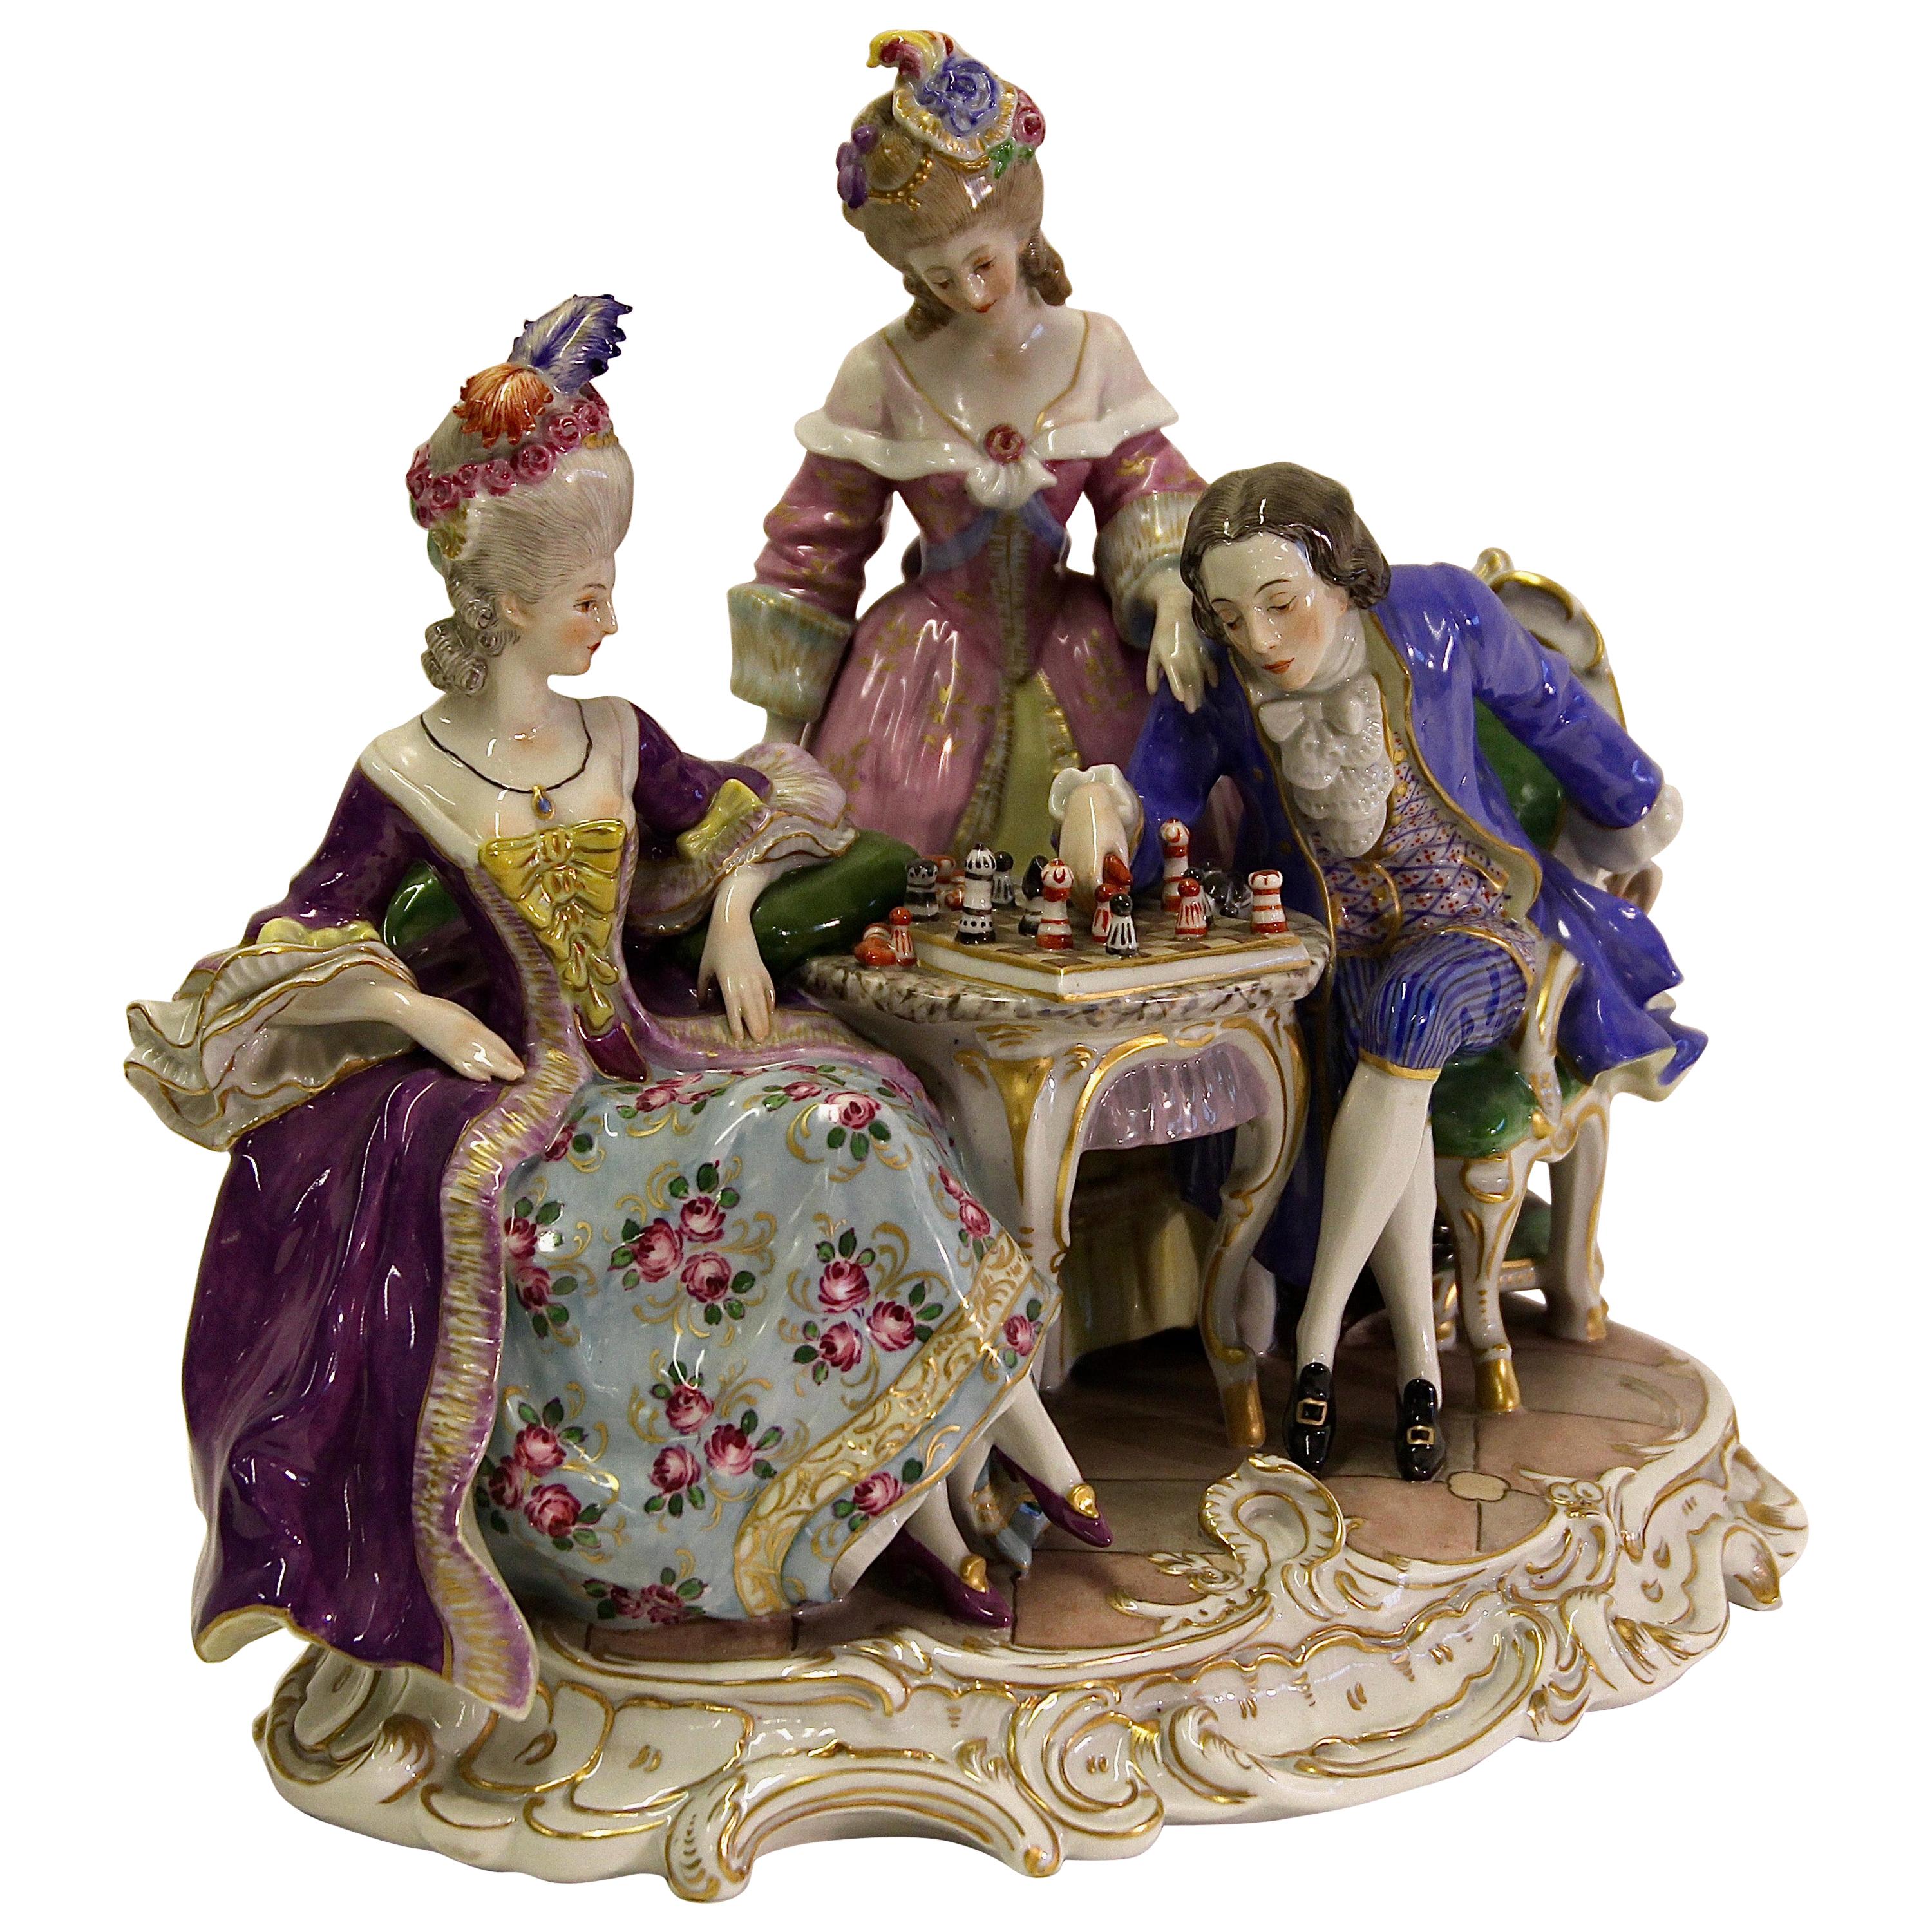 Porcelain Group, "The noble rococo game of chess", German Manufacturer